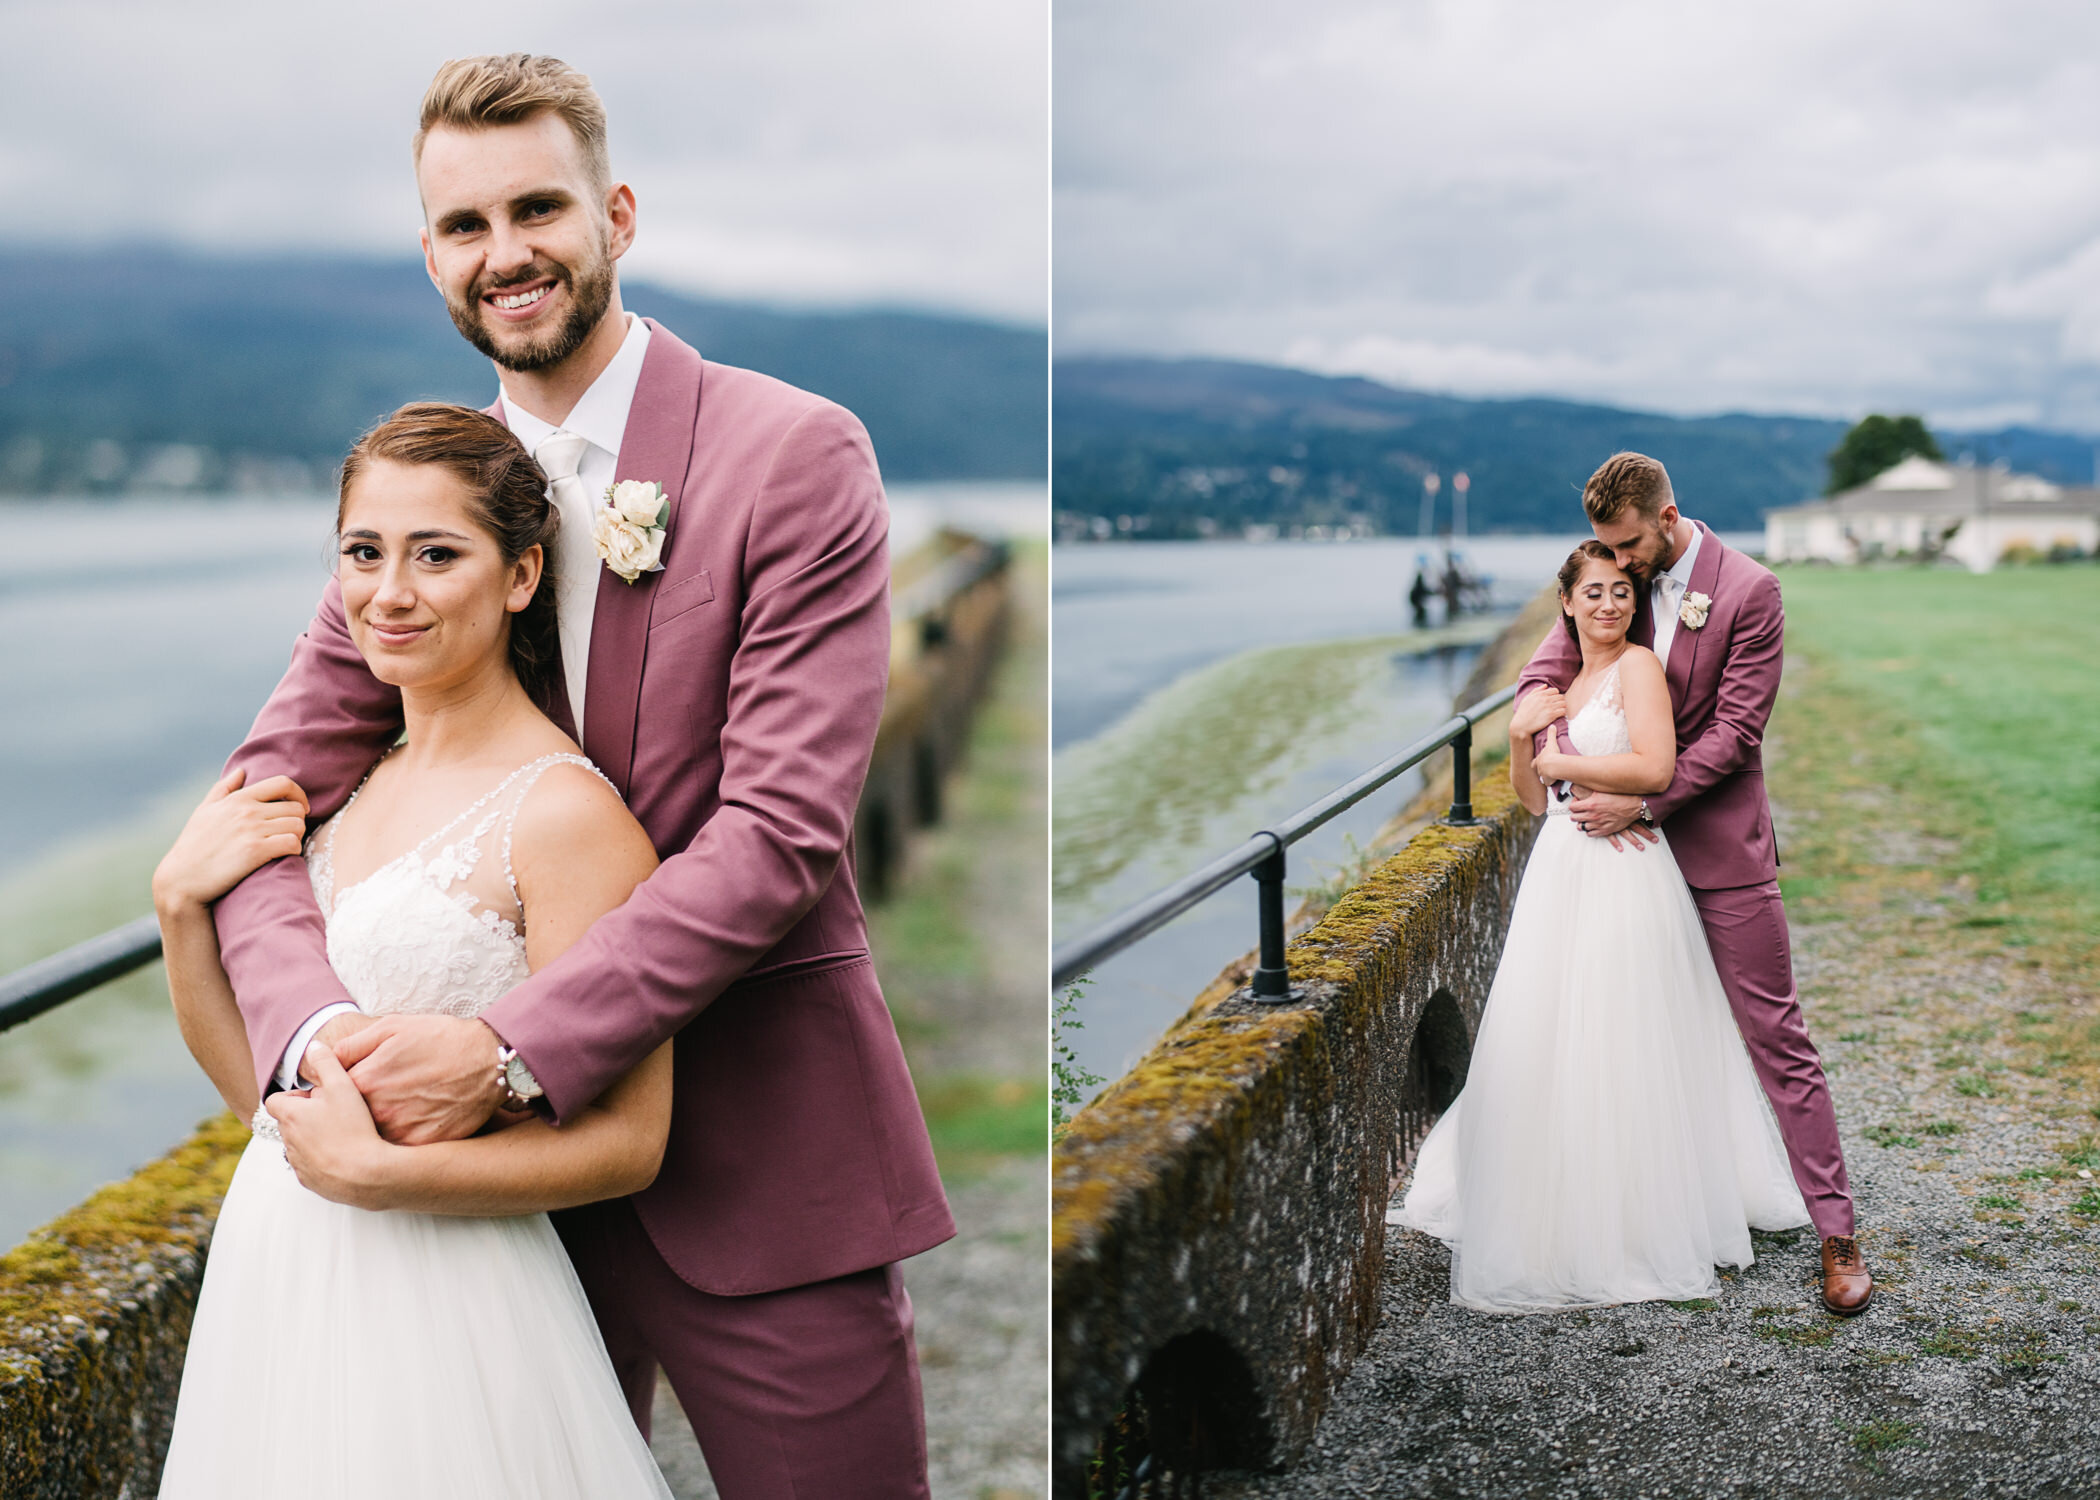  Evening light portraits of bride and groom in purple suit by Columbia river in overcast day 